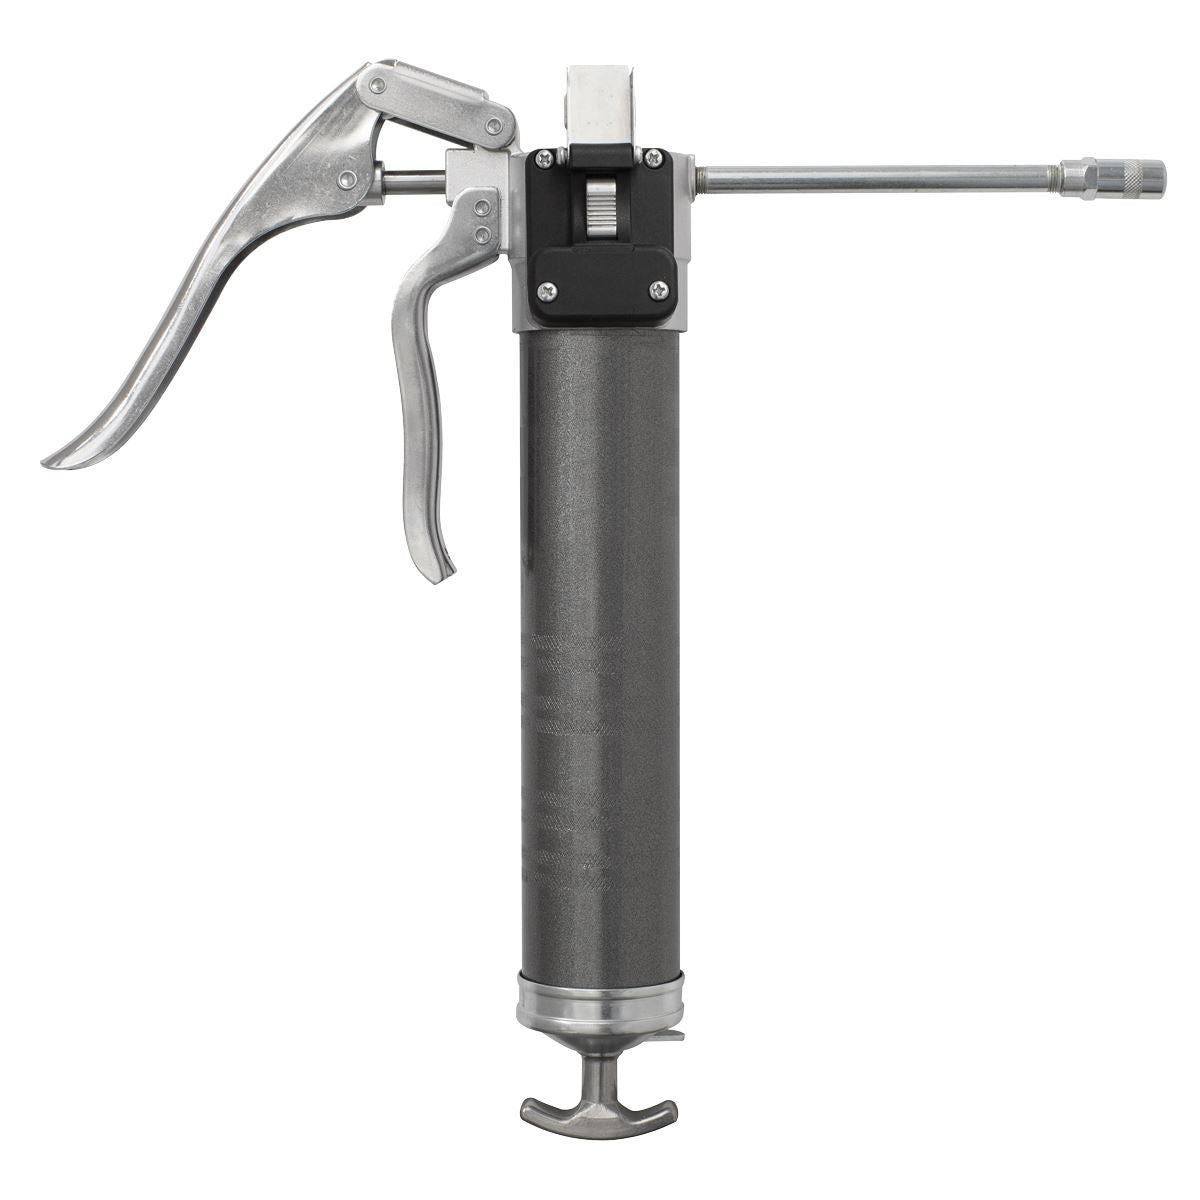 Sealey Pistol Type Grease Gun Quick Release 3-Way Fill